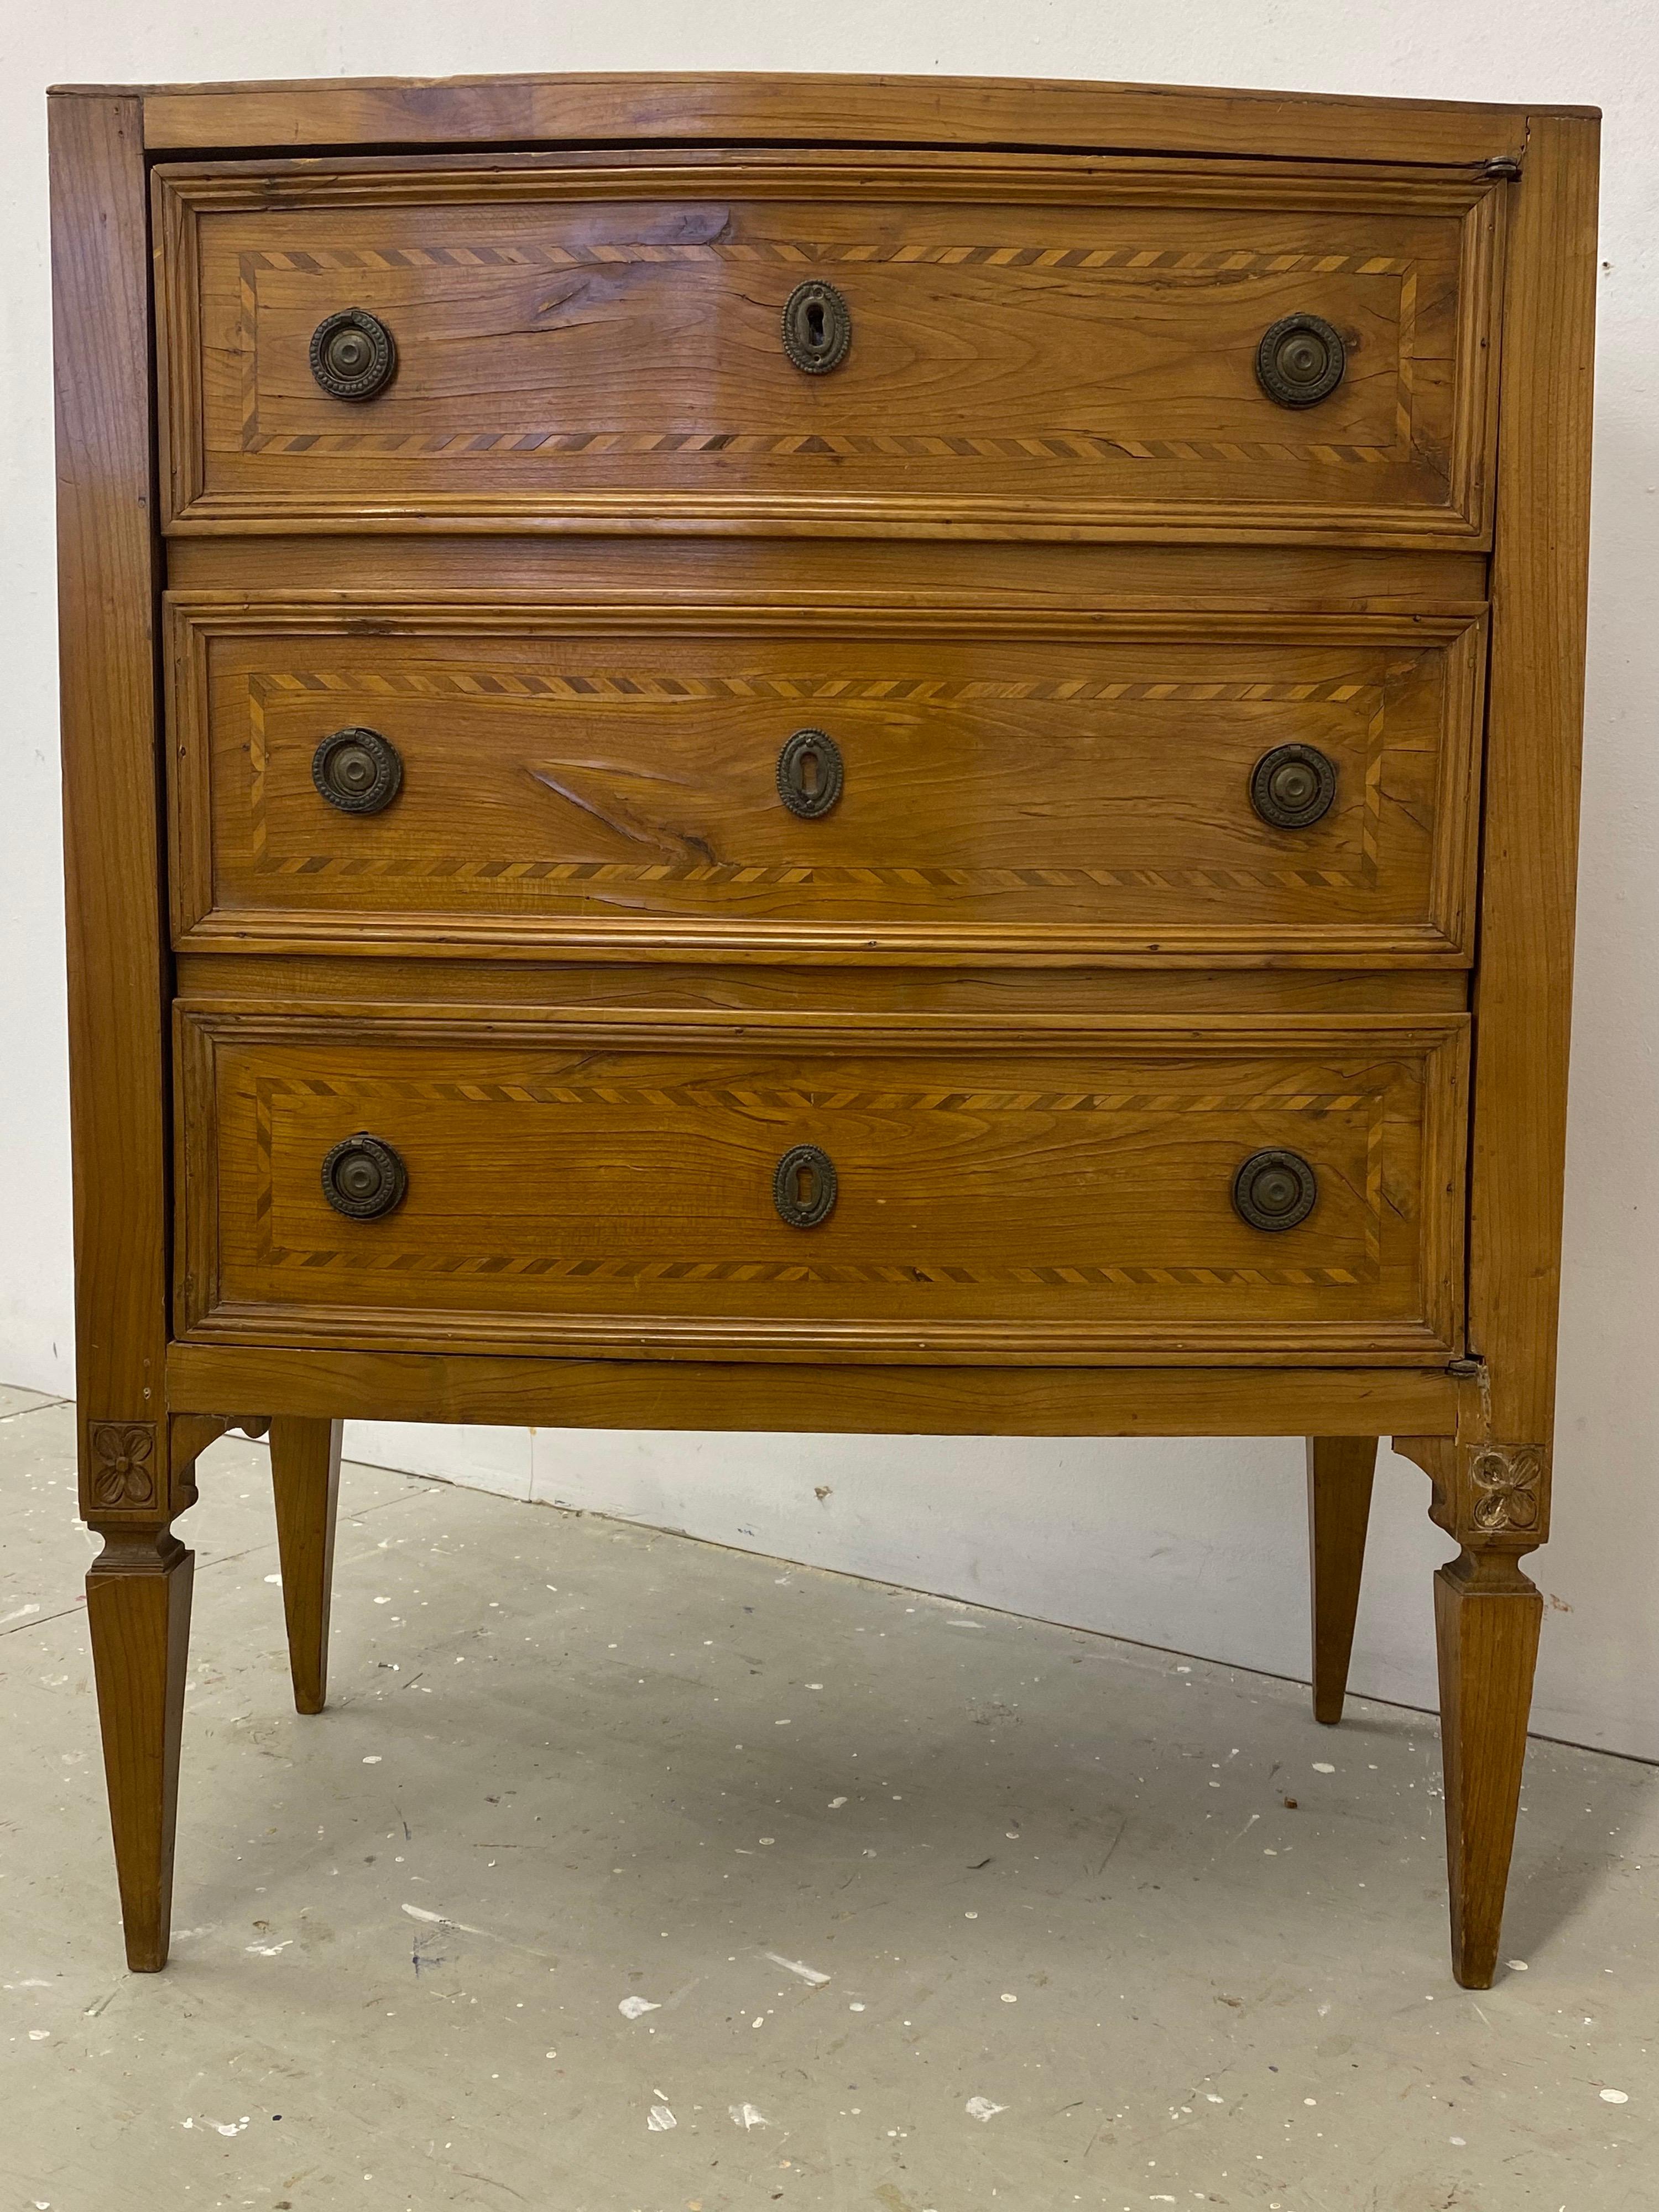 Italian neoclassical inlaid faux 3 drawer bowed front 1 door commode. Uncommon form with one swinging door that has the appearance of 3 pull out drawers. Inlaid top and sides. Overall very solid, but shows some imperfections that are to be expected